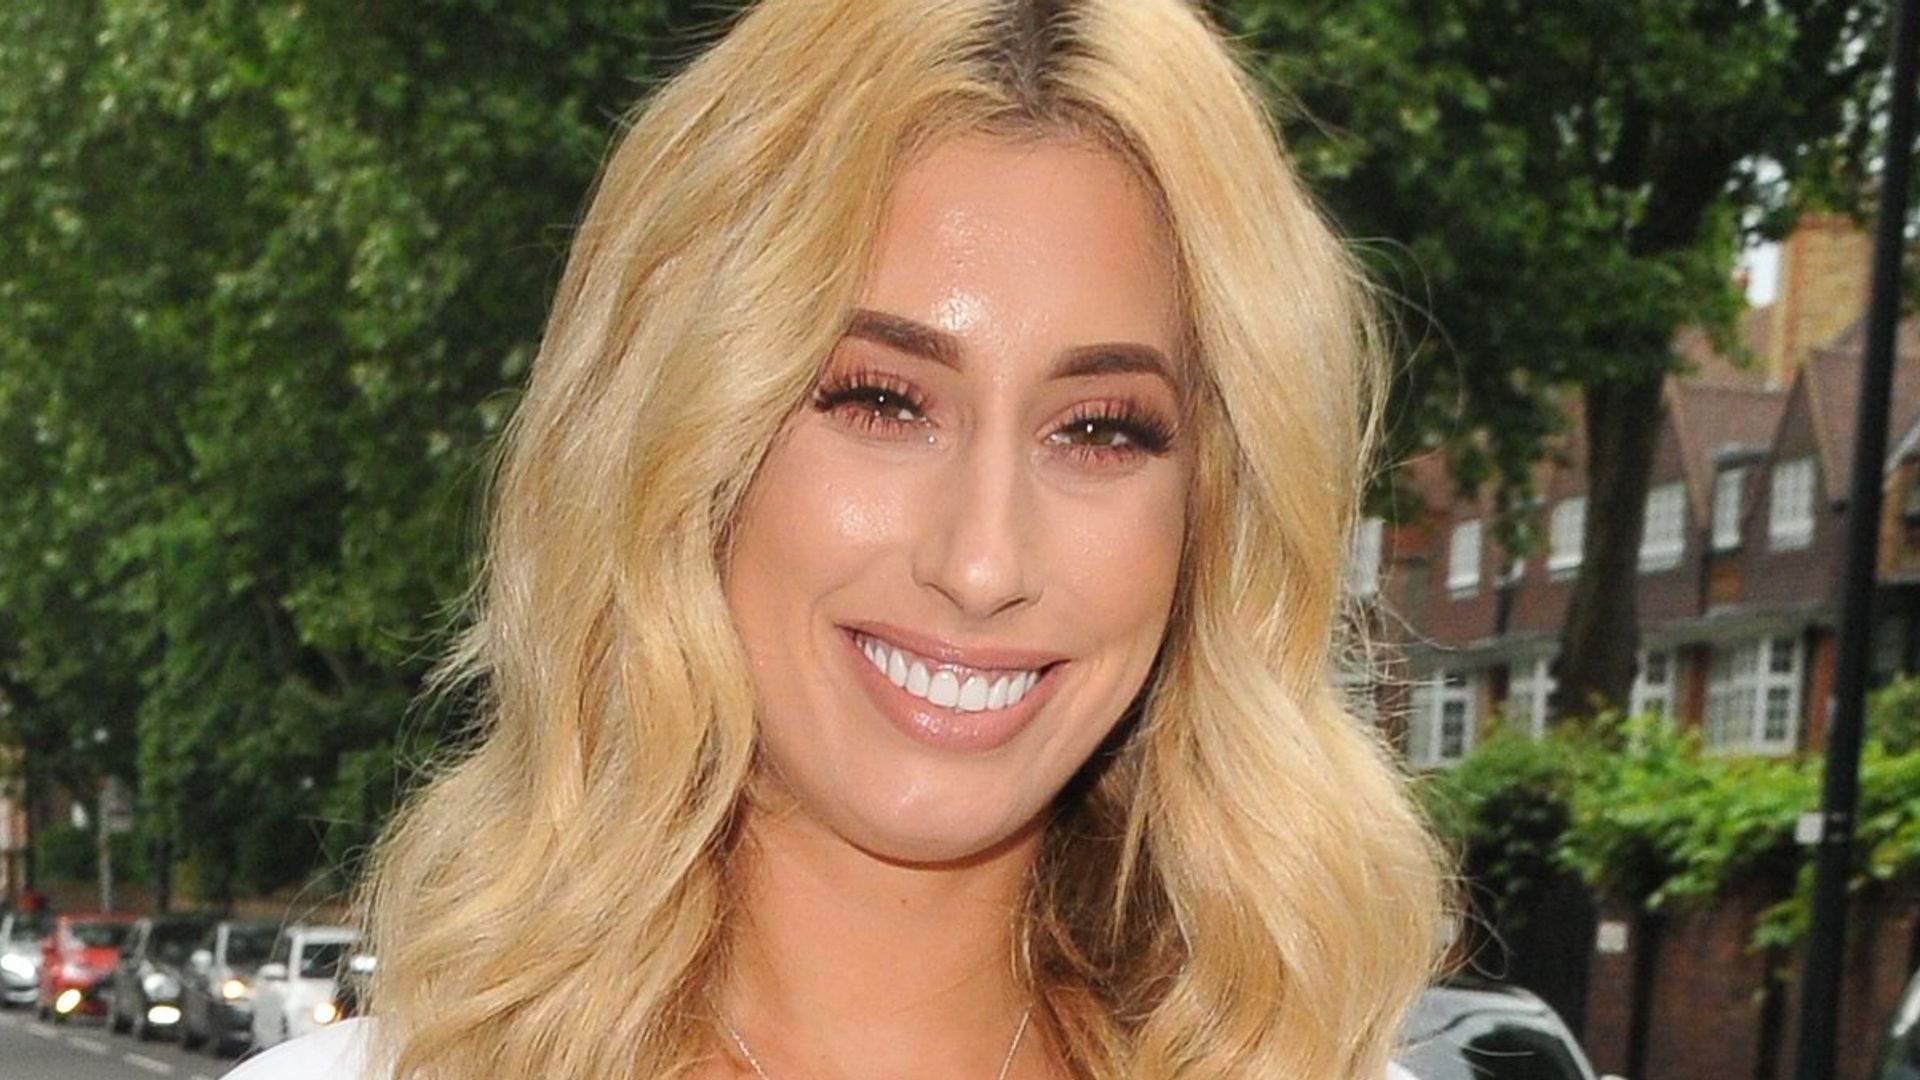 Stacey Solomon in a white dress